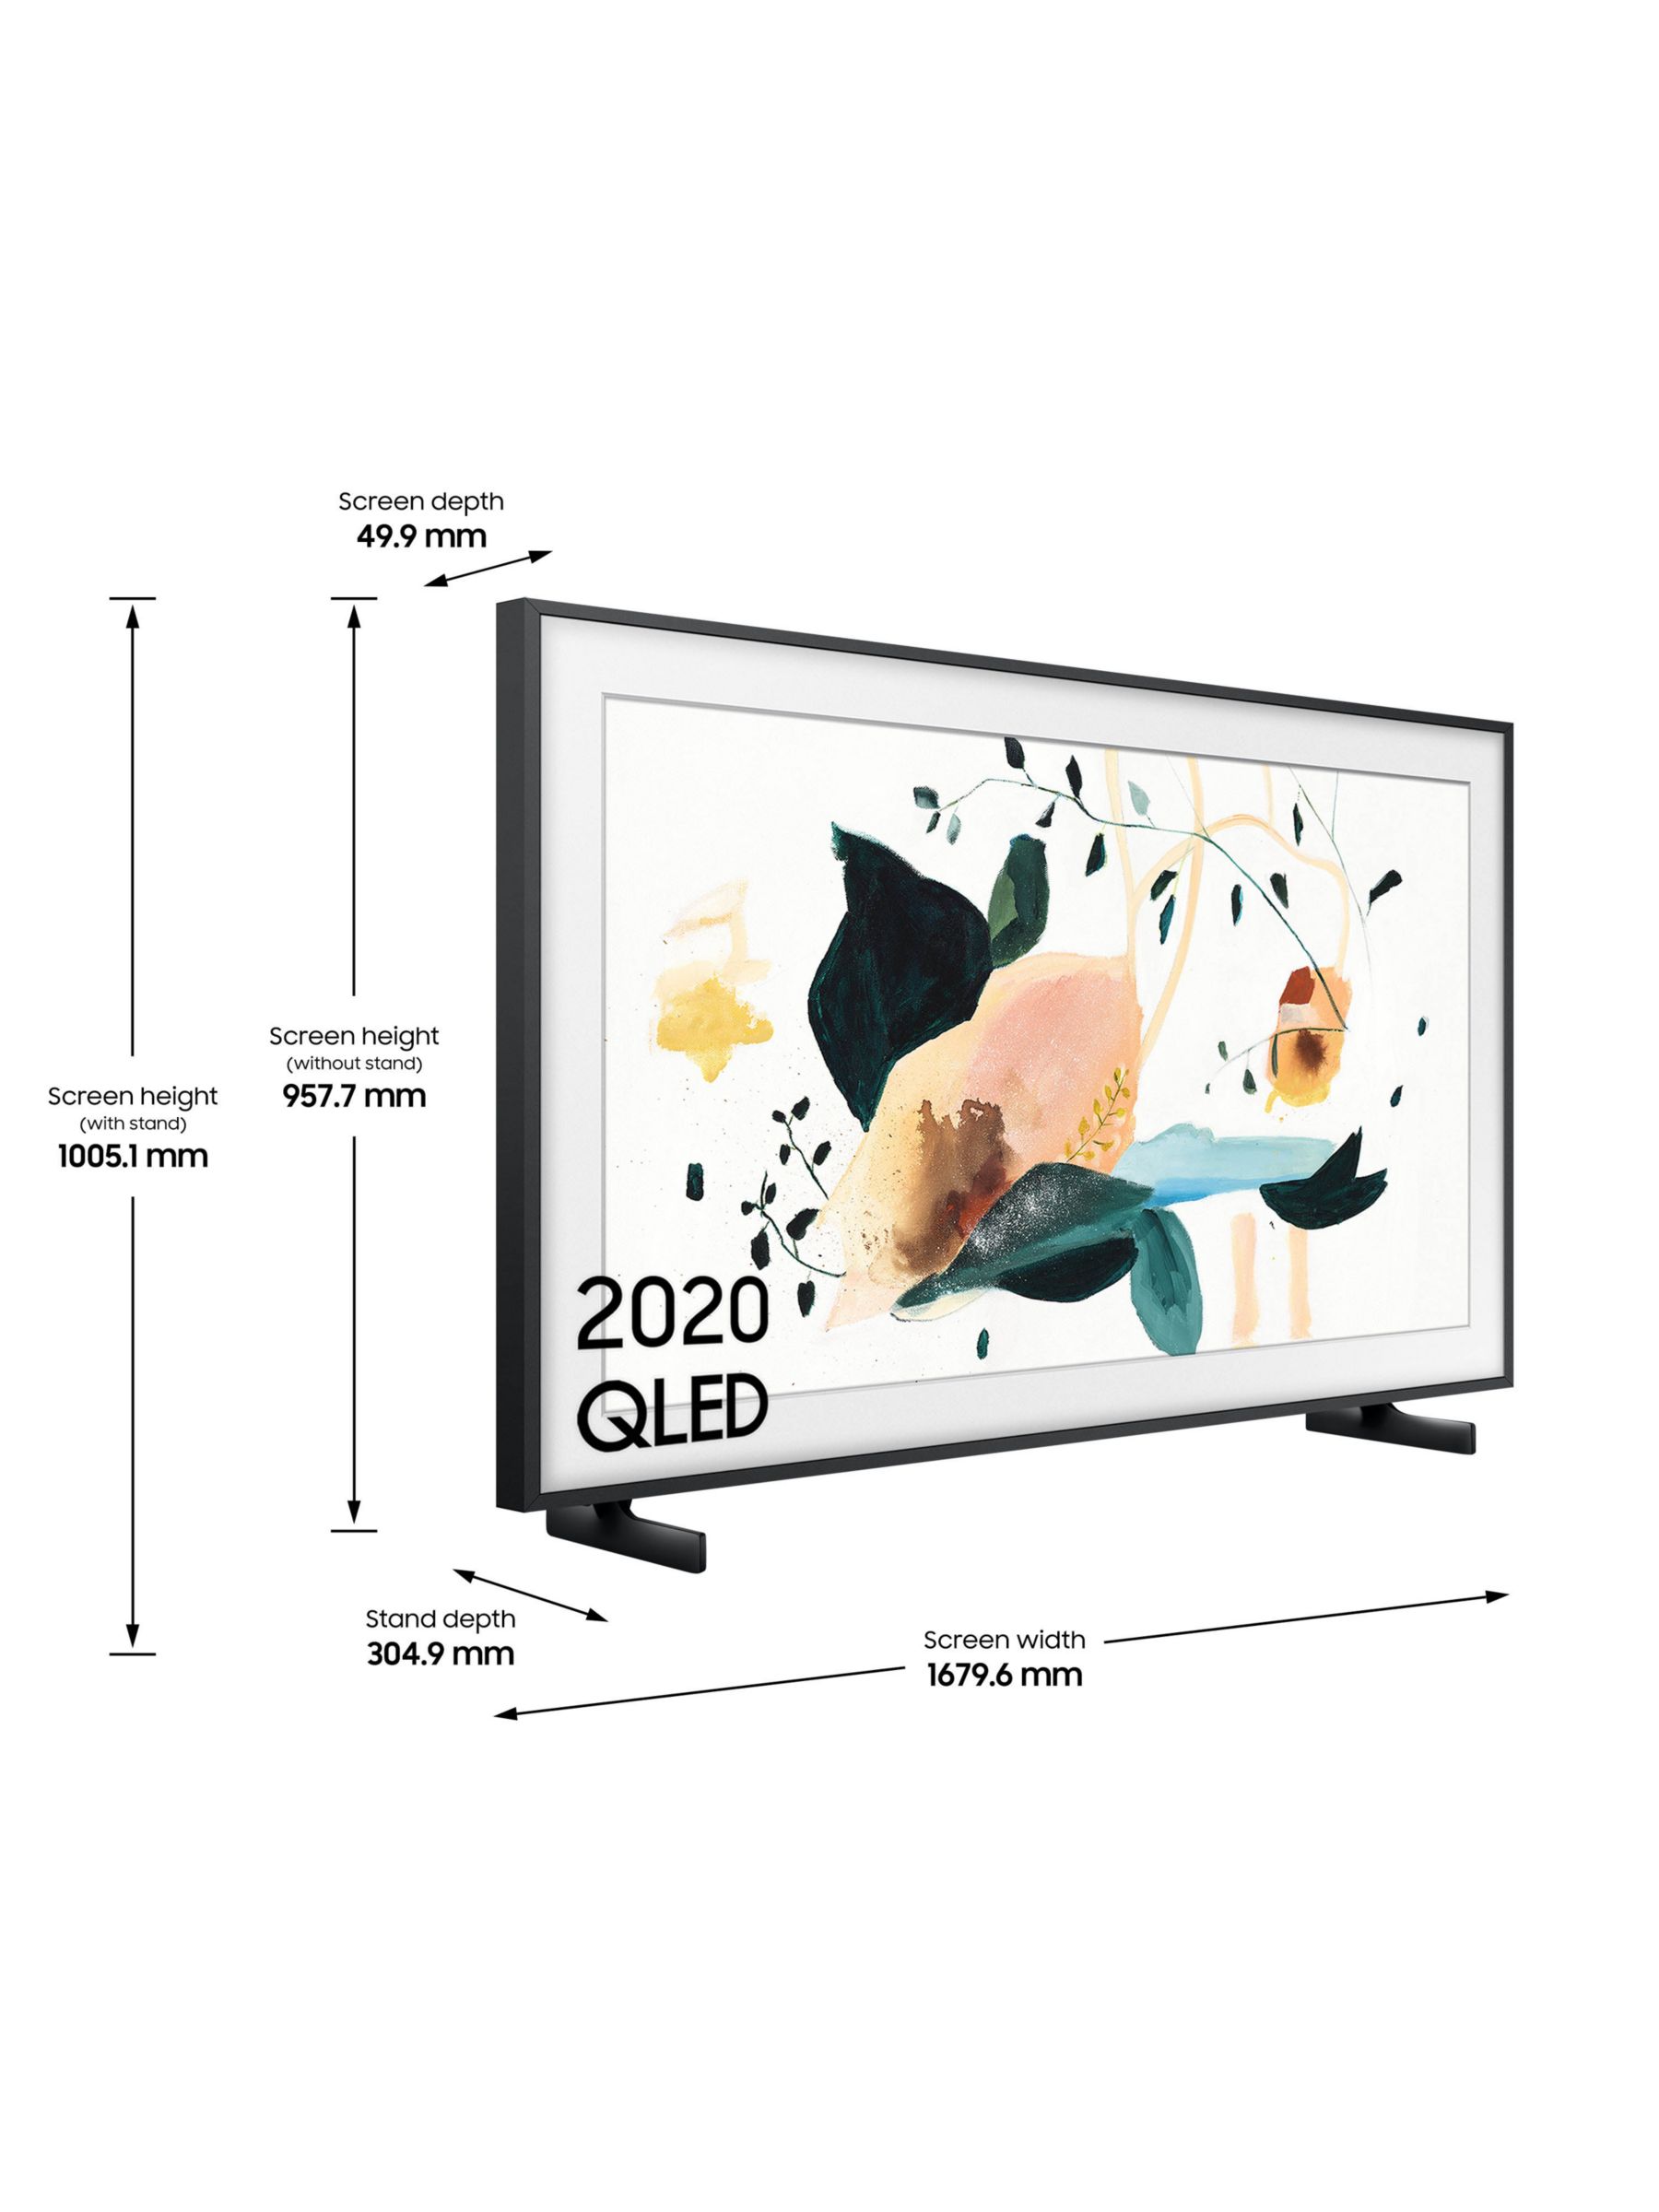 Samsung The Frame (2020) QLED Art Mode TV with No-Gap Wall Mount, 75 inch at John Lewis & Partners